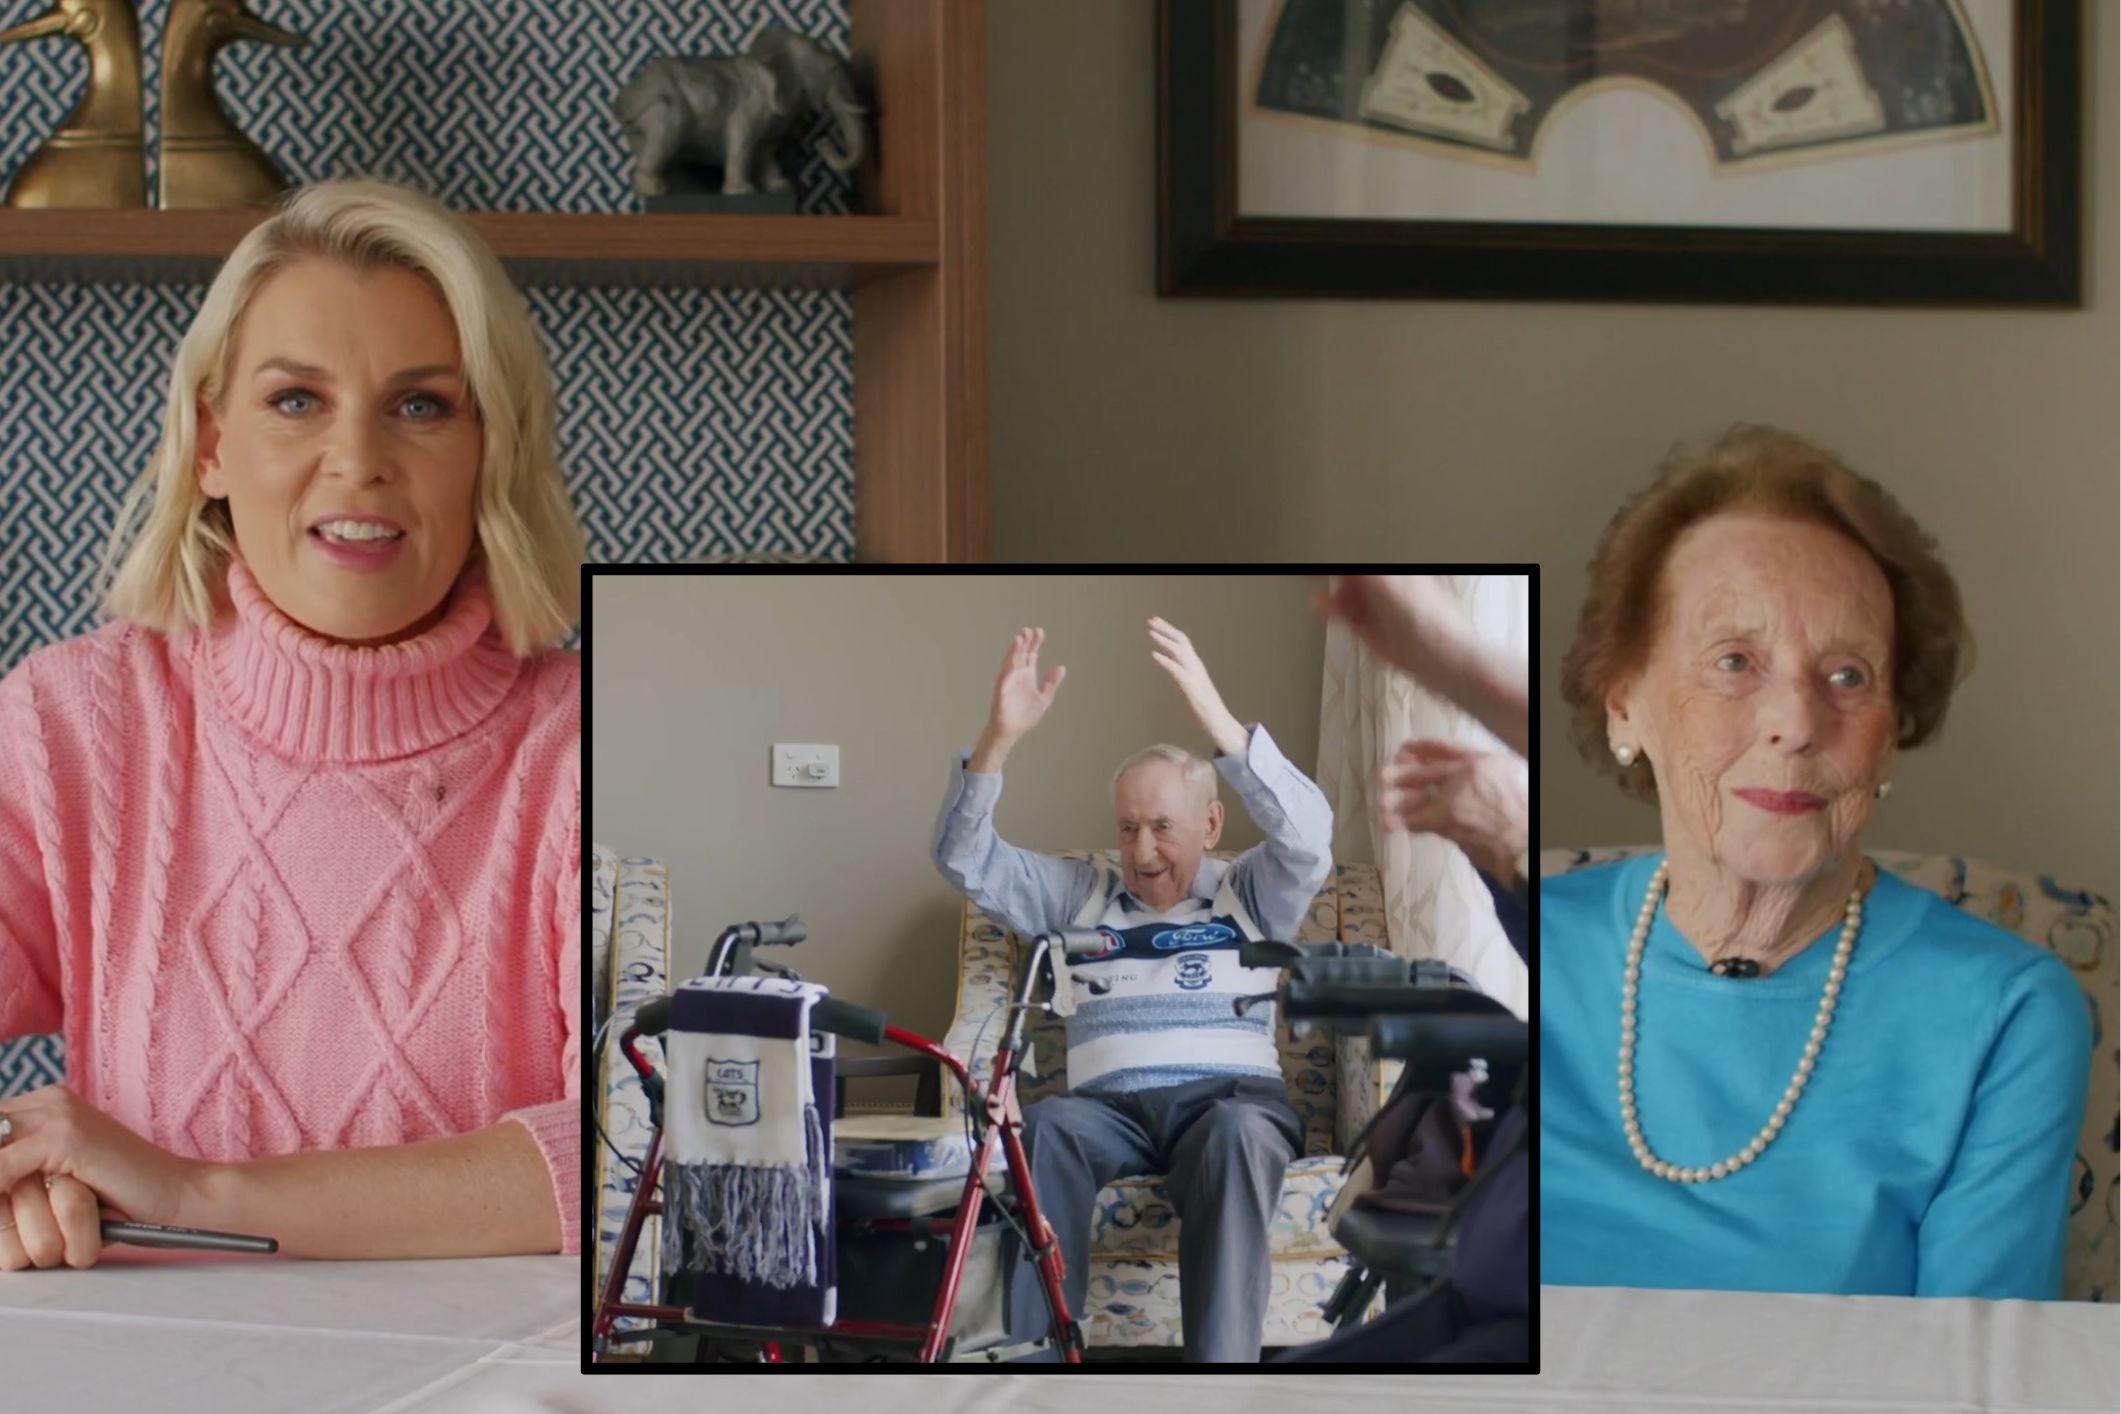 Fox Footy’s Sarah Jones Brings AFL Commentary Flair to Aged Care